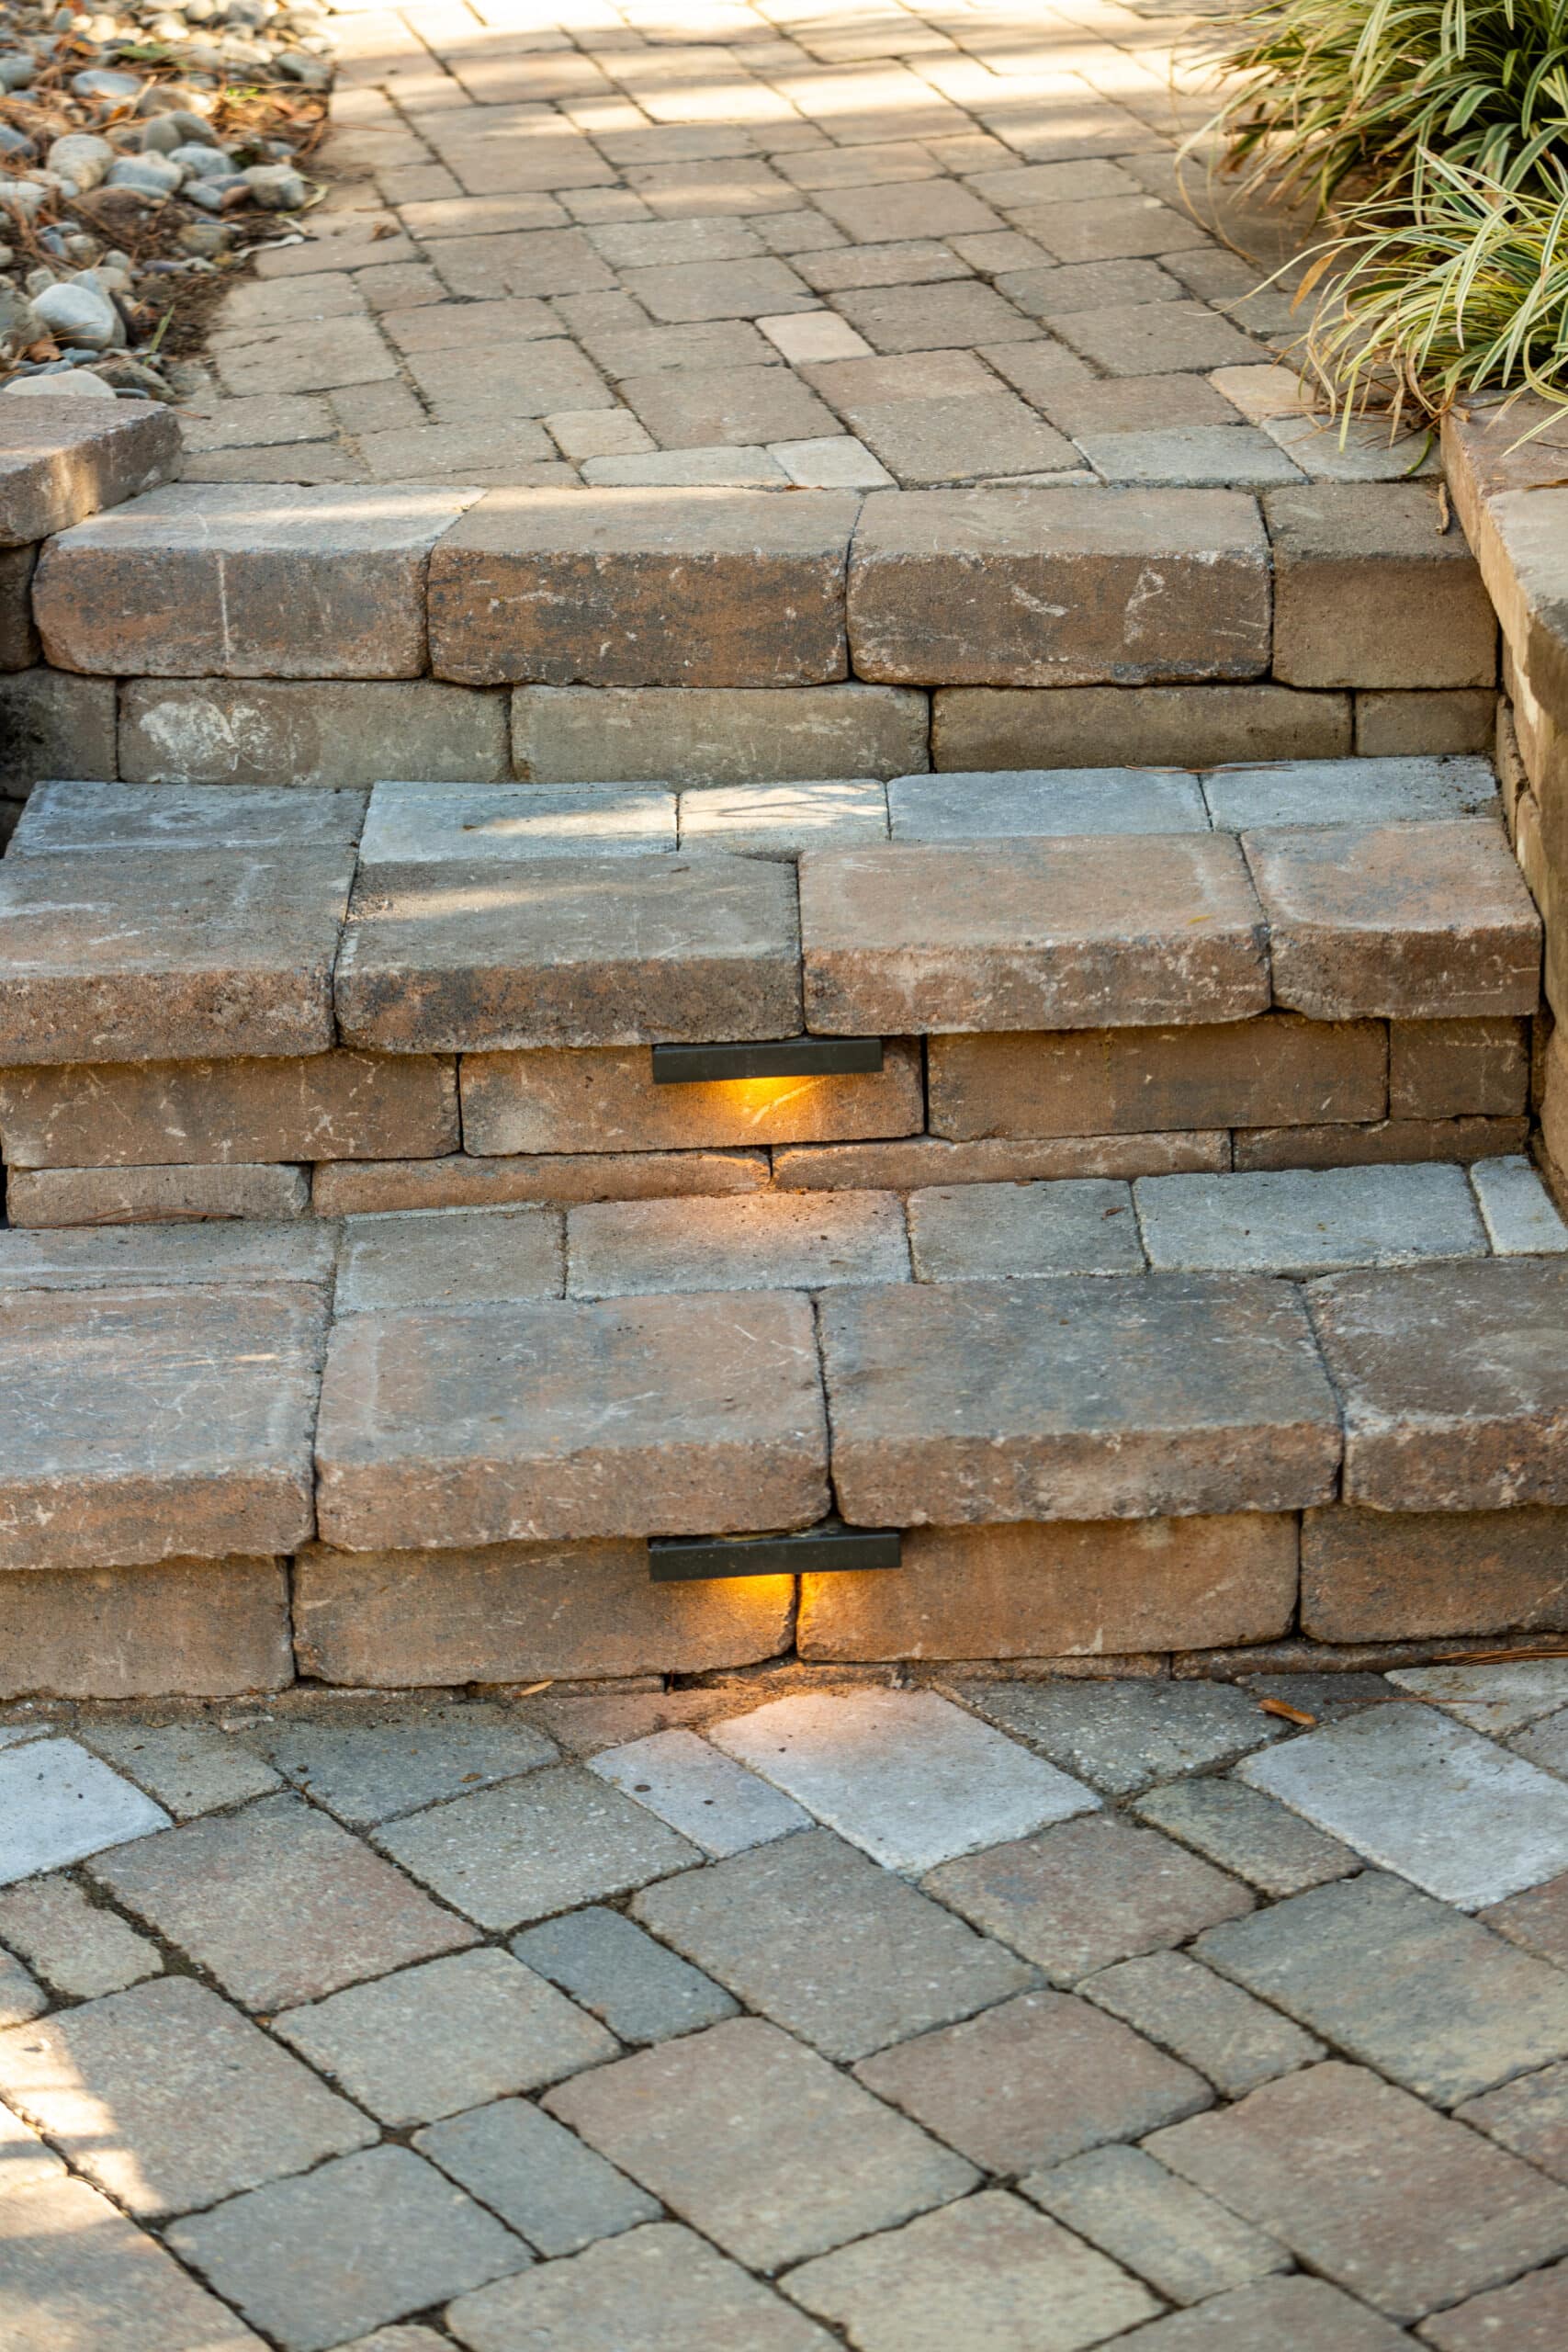 A set of steps leading to a stone walkway.